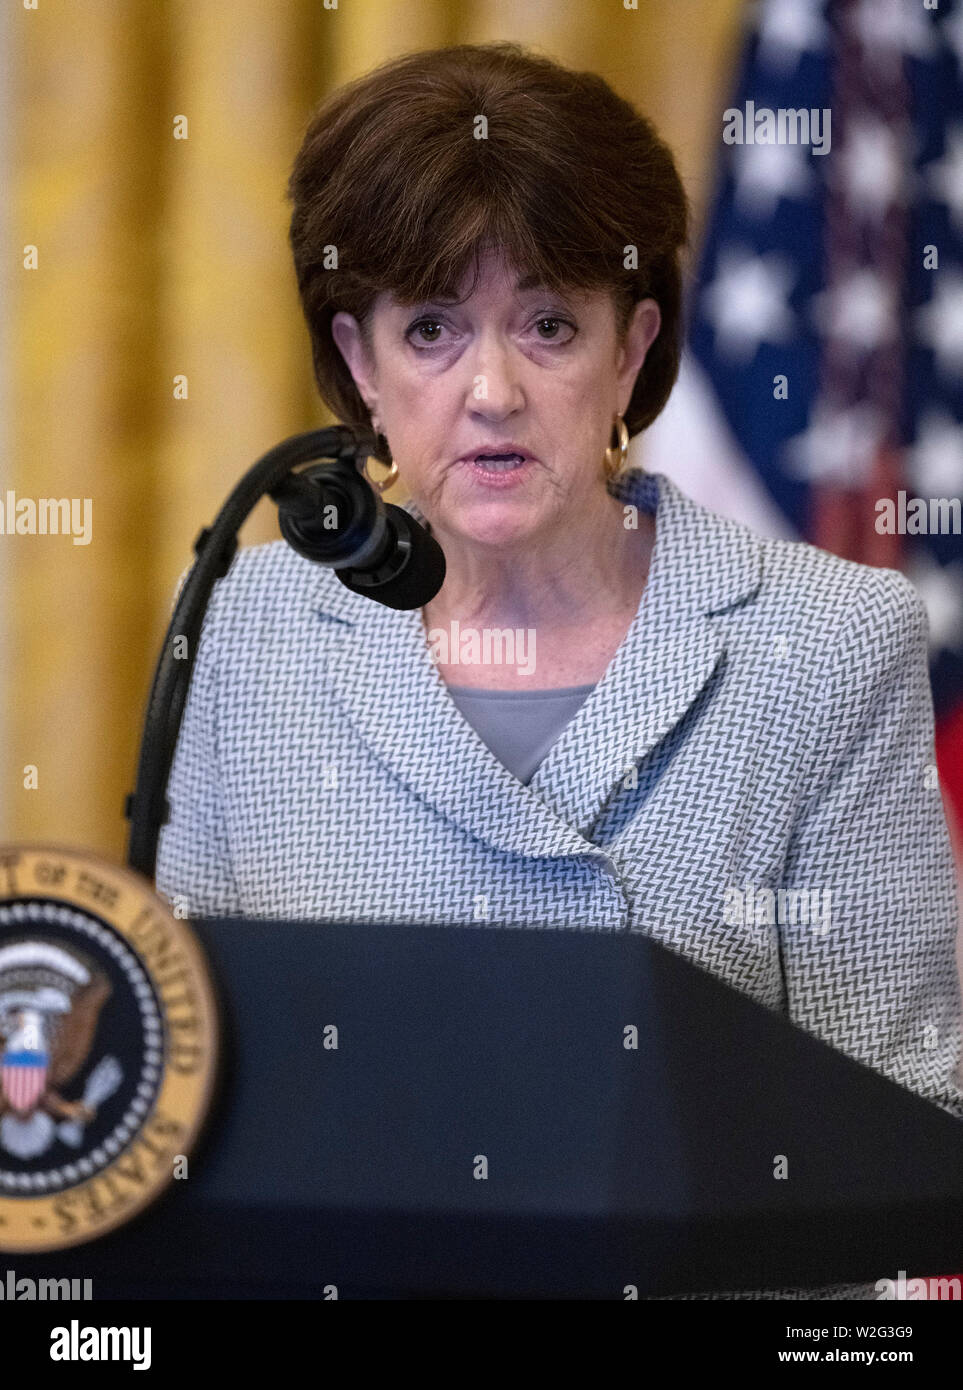 Chair of the Council on Environmental Quality Mary Neumayr, makes remarks on “America's Environmental Leadership” at an event hosted by United States President Donald J. Trump in the East Room of the White House in Washington, DC on Monday, July 8, 2019.Credit: Ron Sachs/CNP /MediaPunch Stock Photo